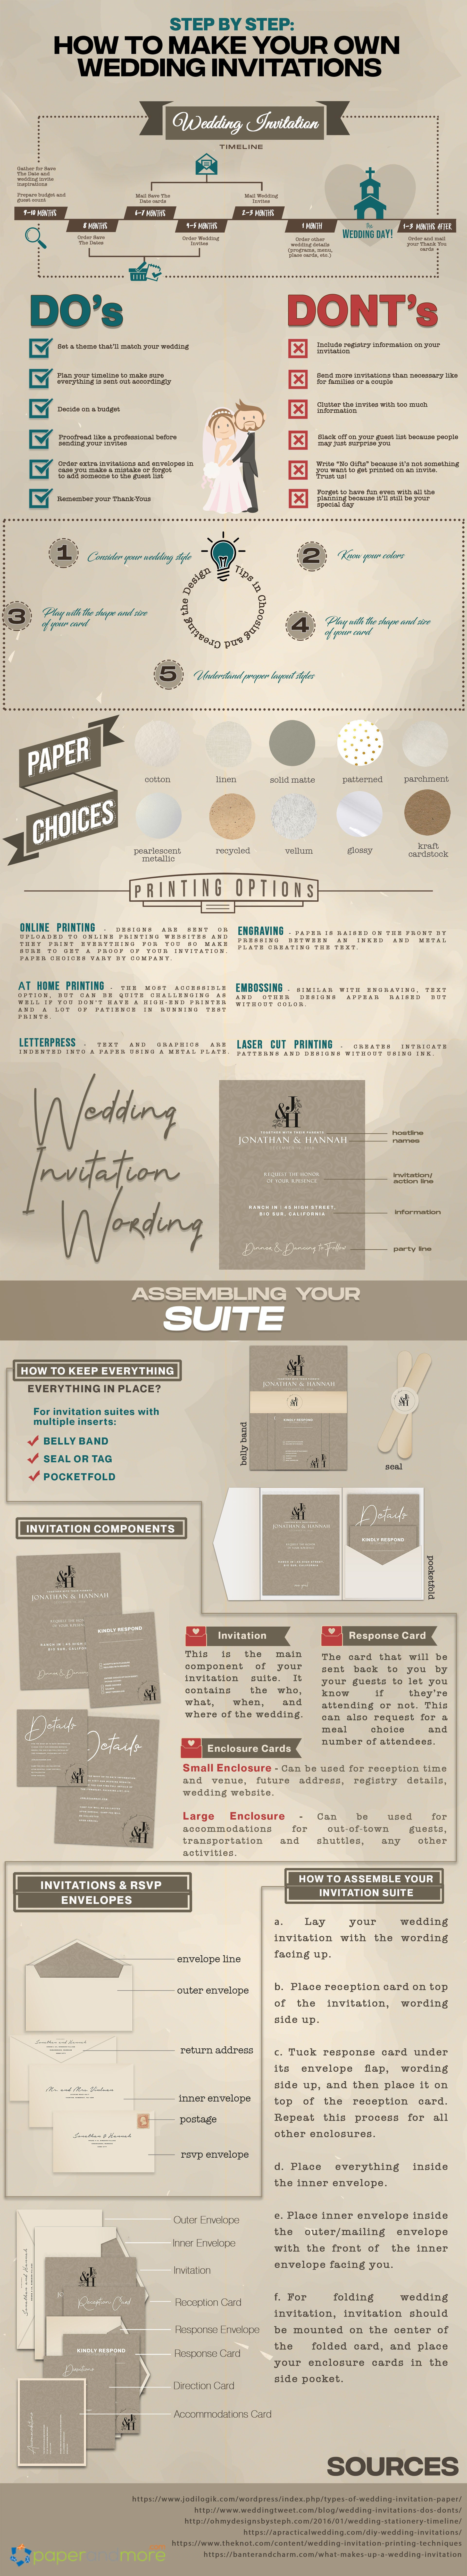 create your own wedding invitations